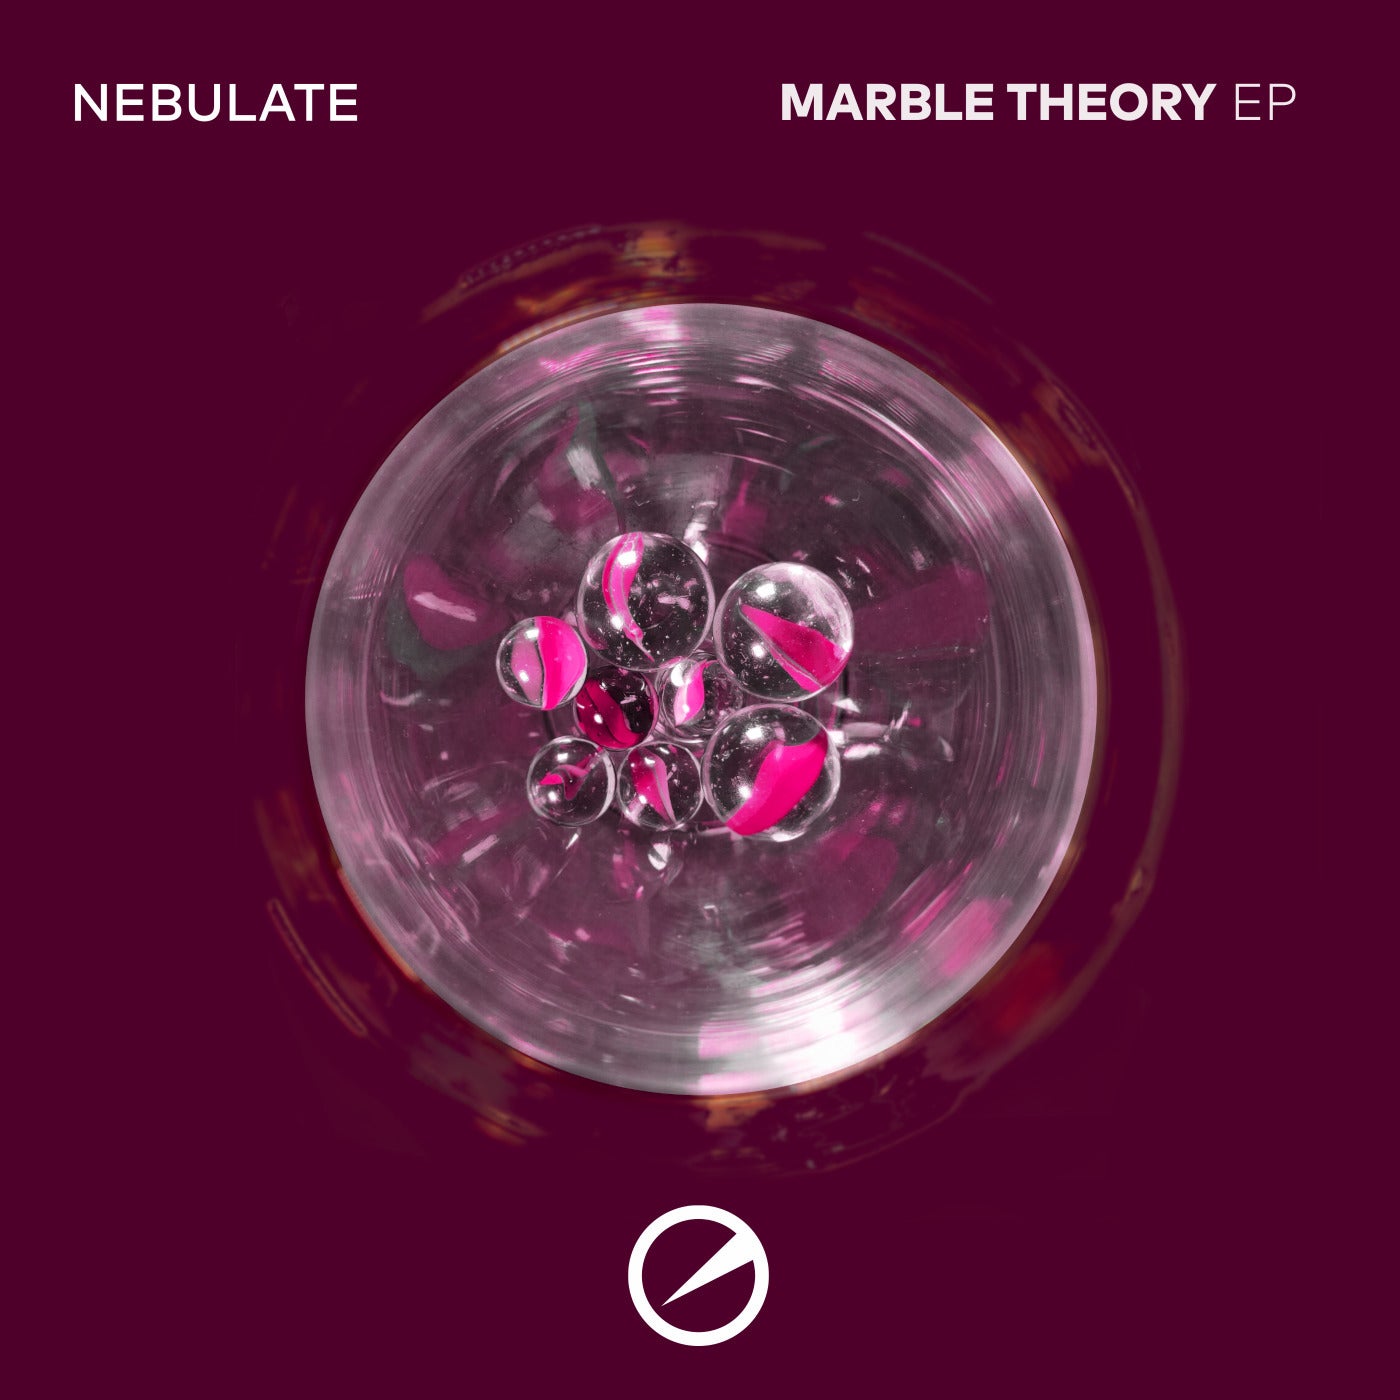 Marble Theory EP